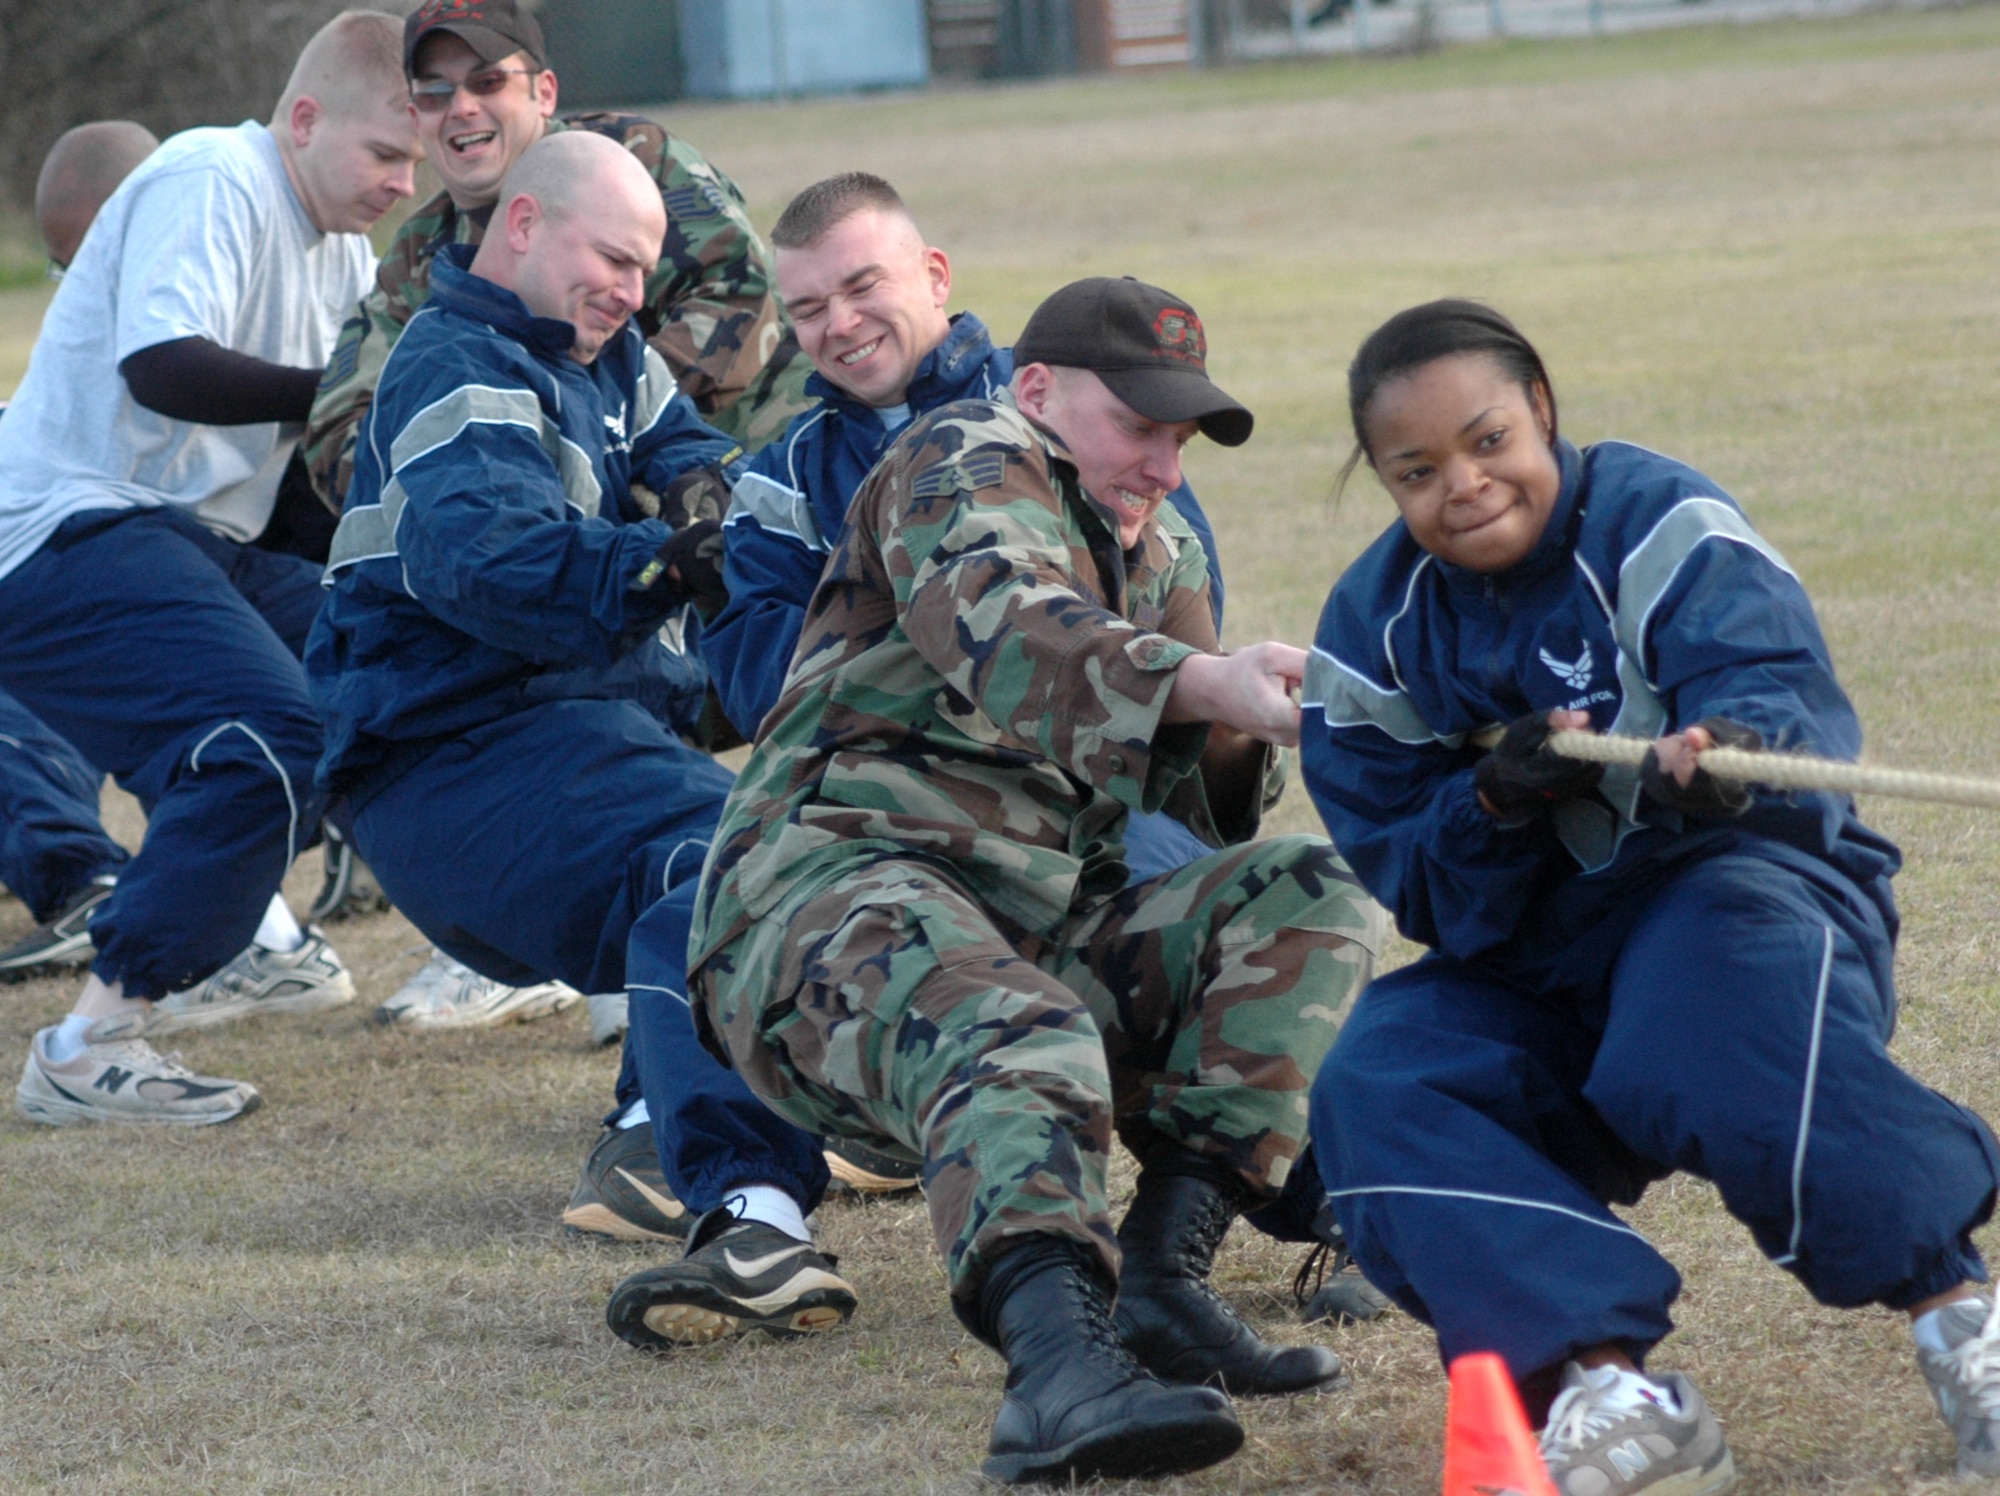 A team from the 51st Combat Communications Squadron competes in the tug-of-war competition. The tug-of- war was just one of many activities during the 5th Group Challenge Day, a morale-building event formerly known as the Gator Challenge. U.S. Air Force photo by Sue Sapp.